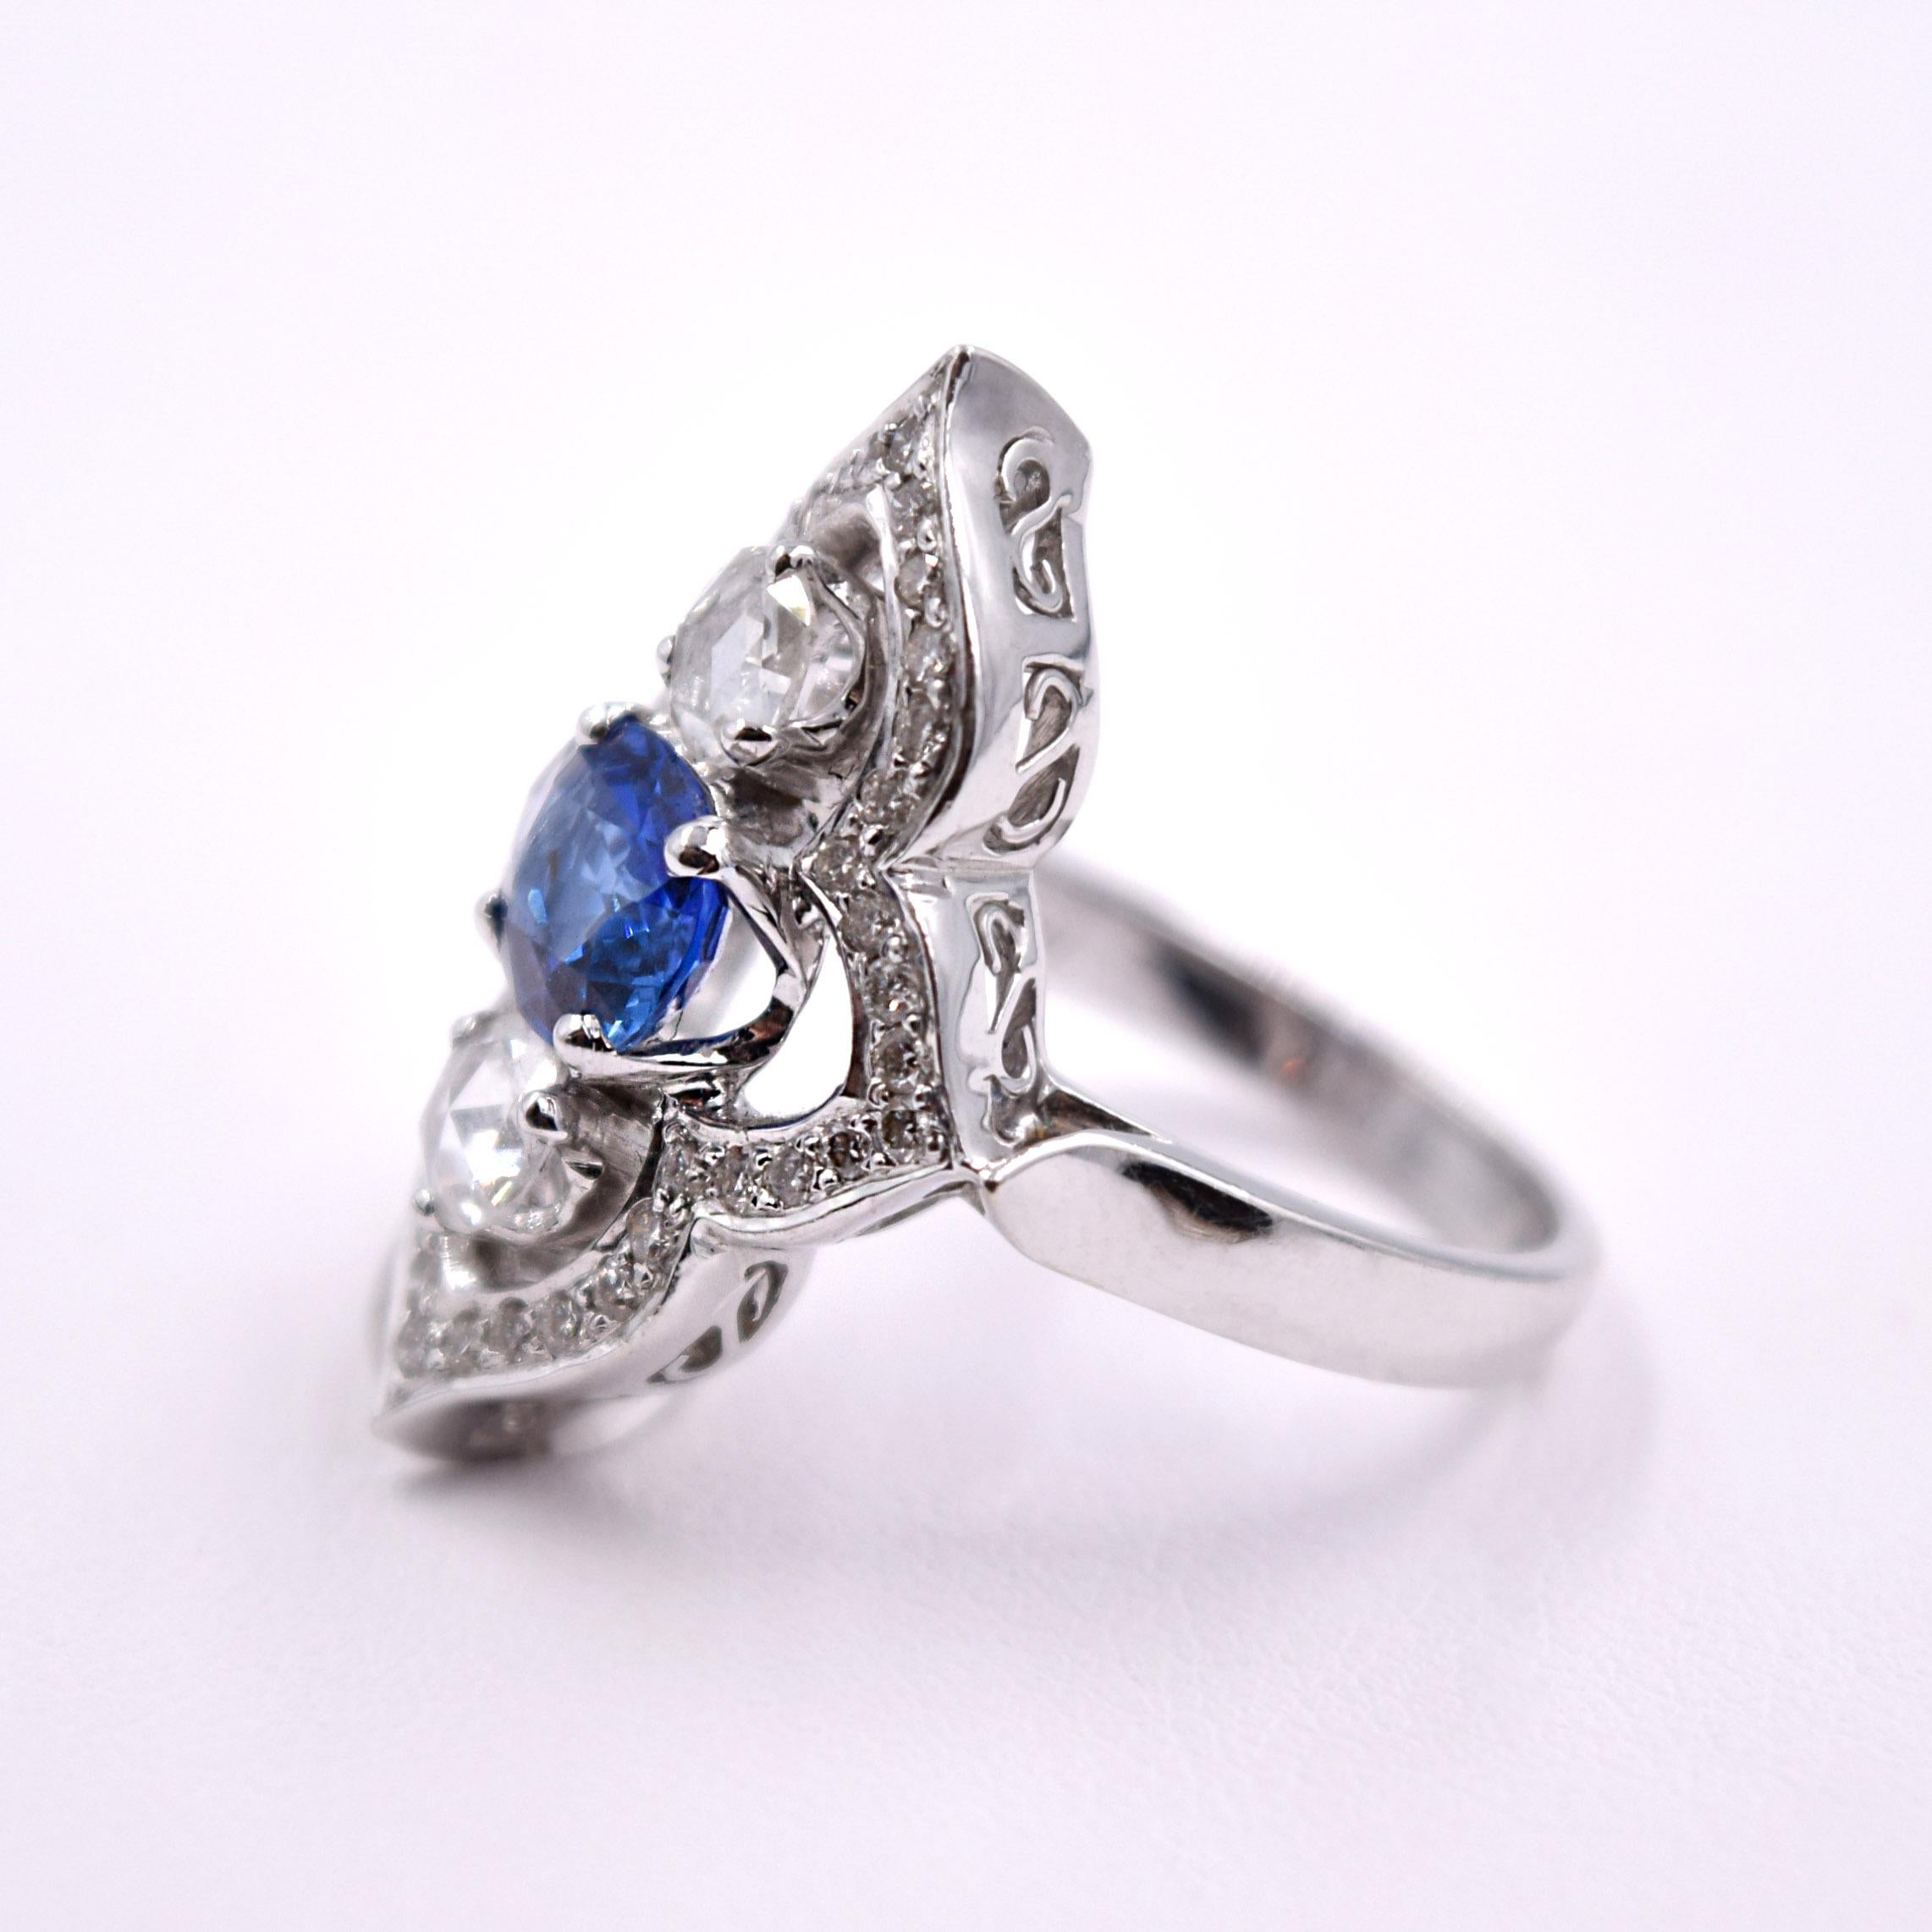 1.42ct blue sapphire and 0.83ct white diamond statement ring by Sethi Couture in 18K white gold.
Ring is size 6.5 and can be sized.
